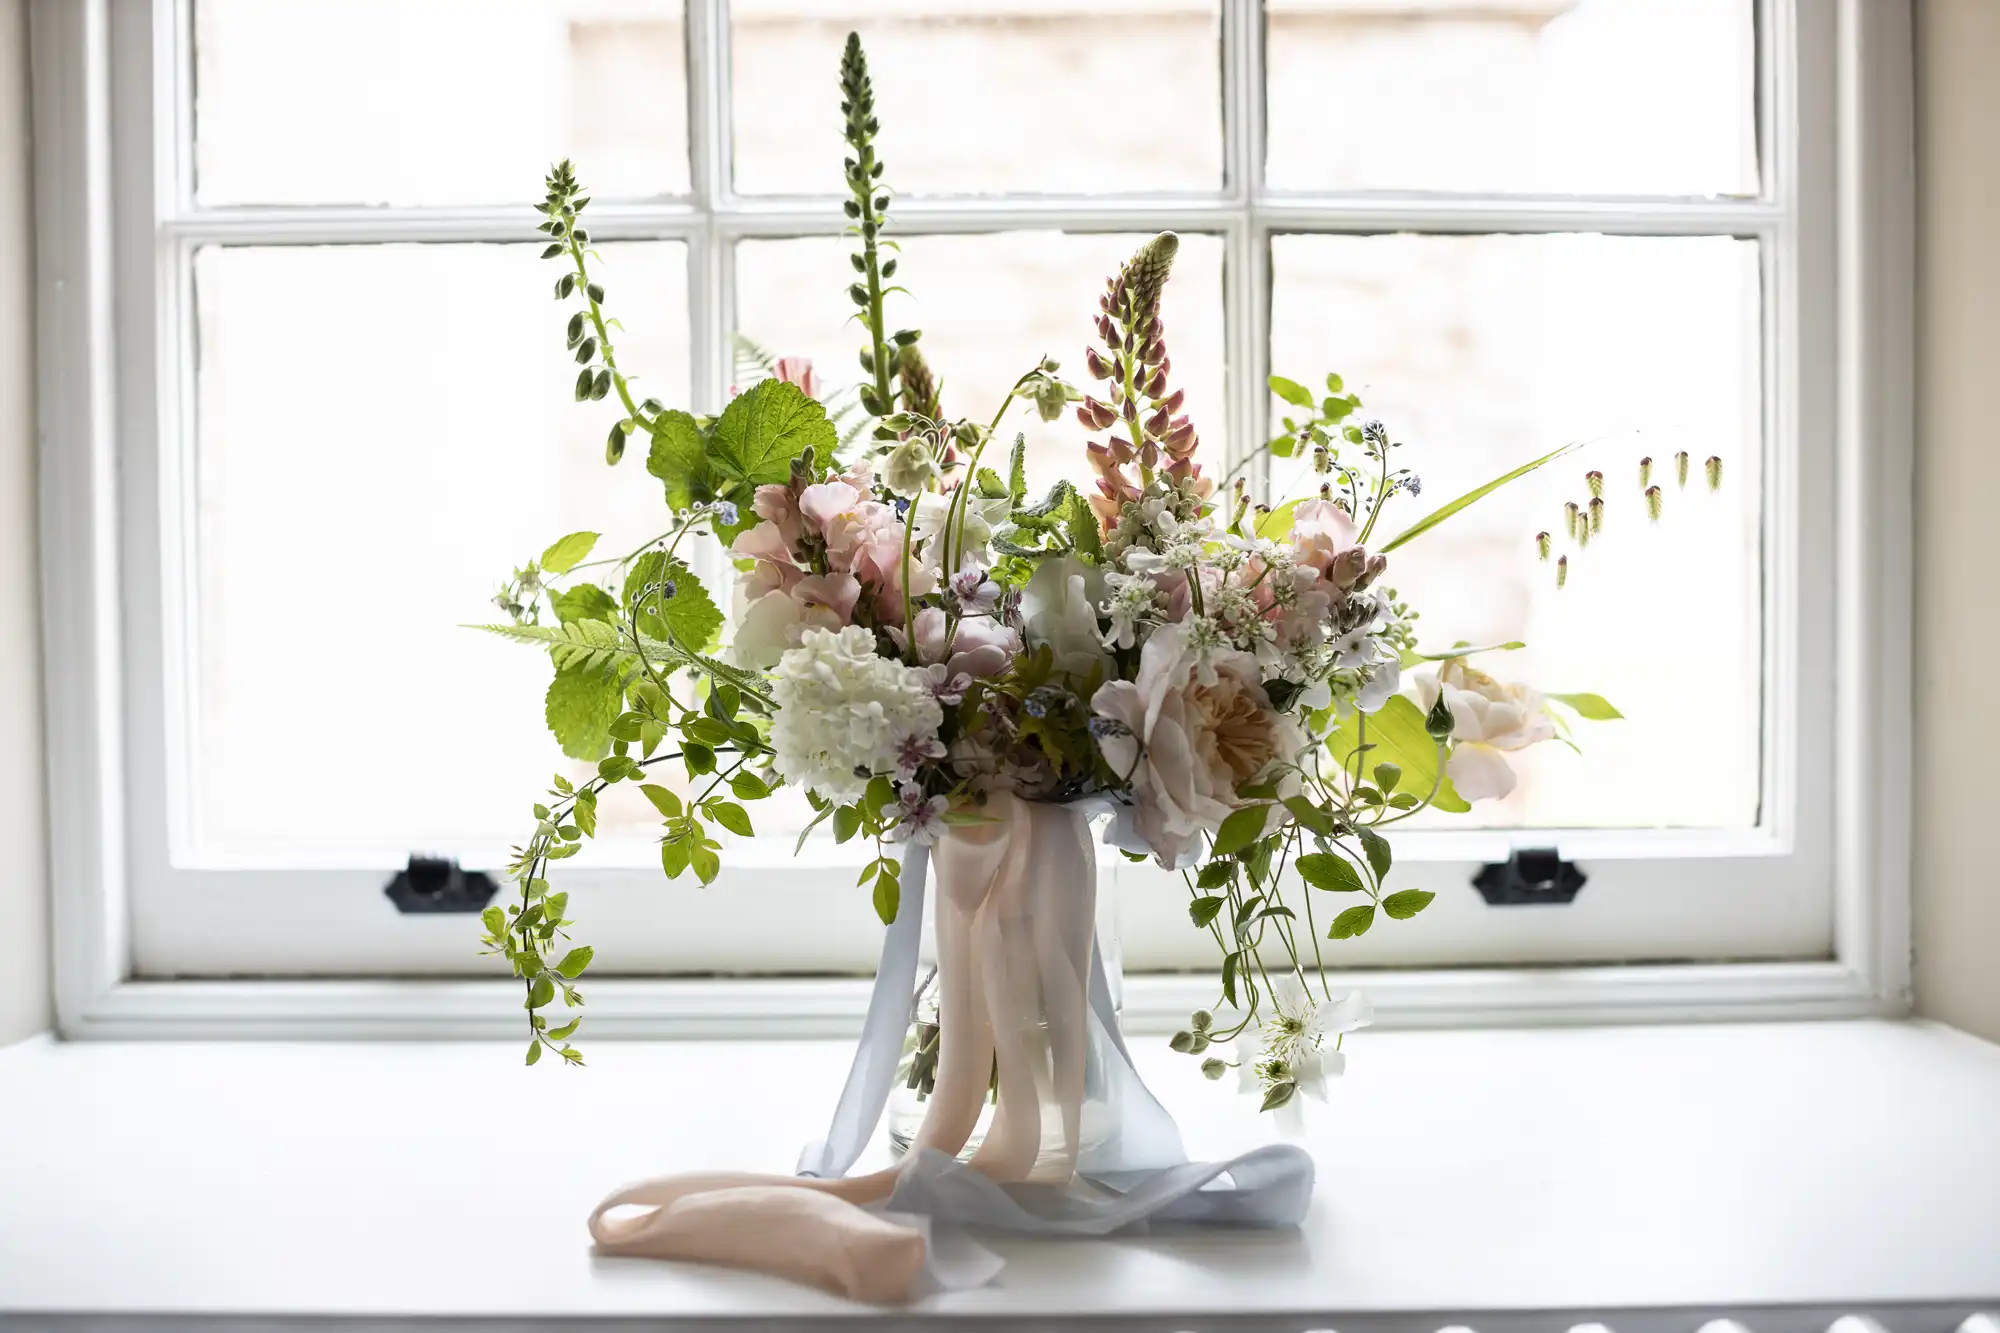 A floral arrangement featuring a mix of flowers and greenery in soft colors, set in front of a bright window on a white sill, adorned with a flowing ribbon.